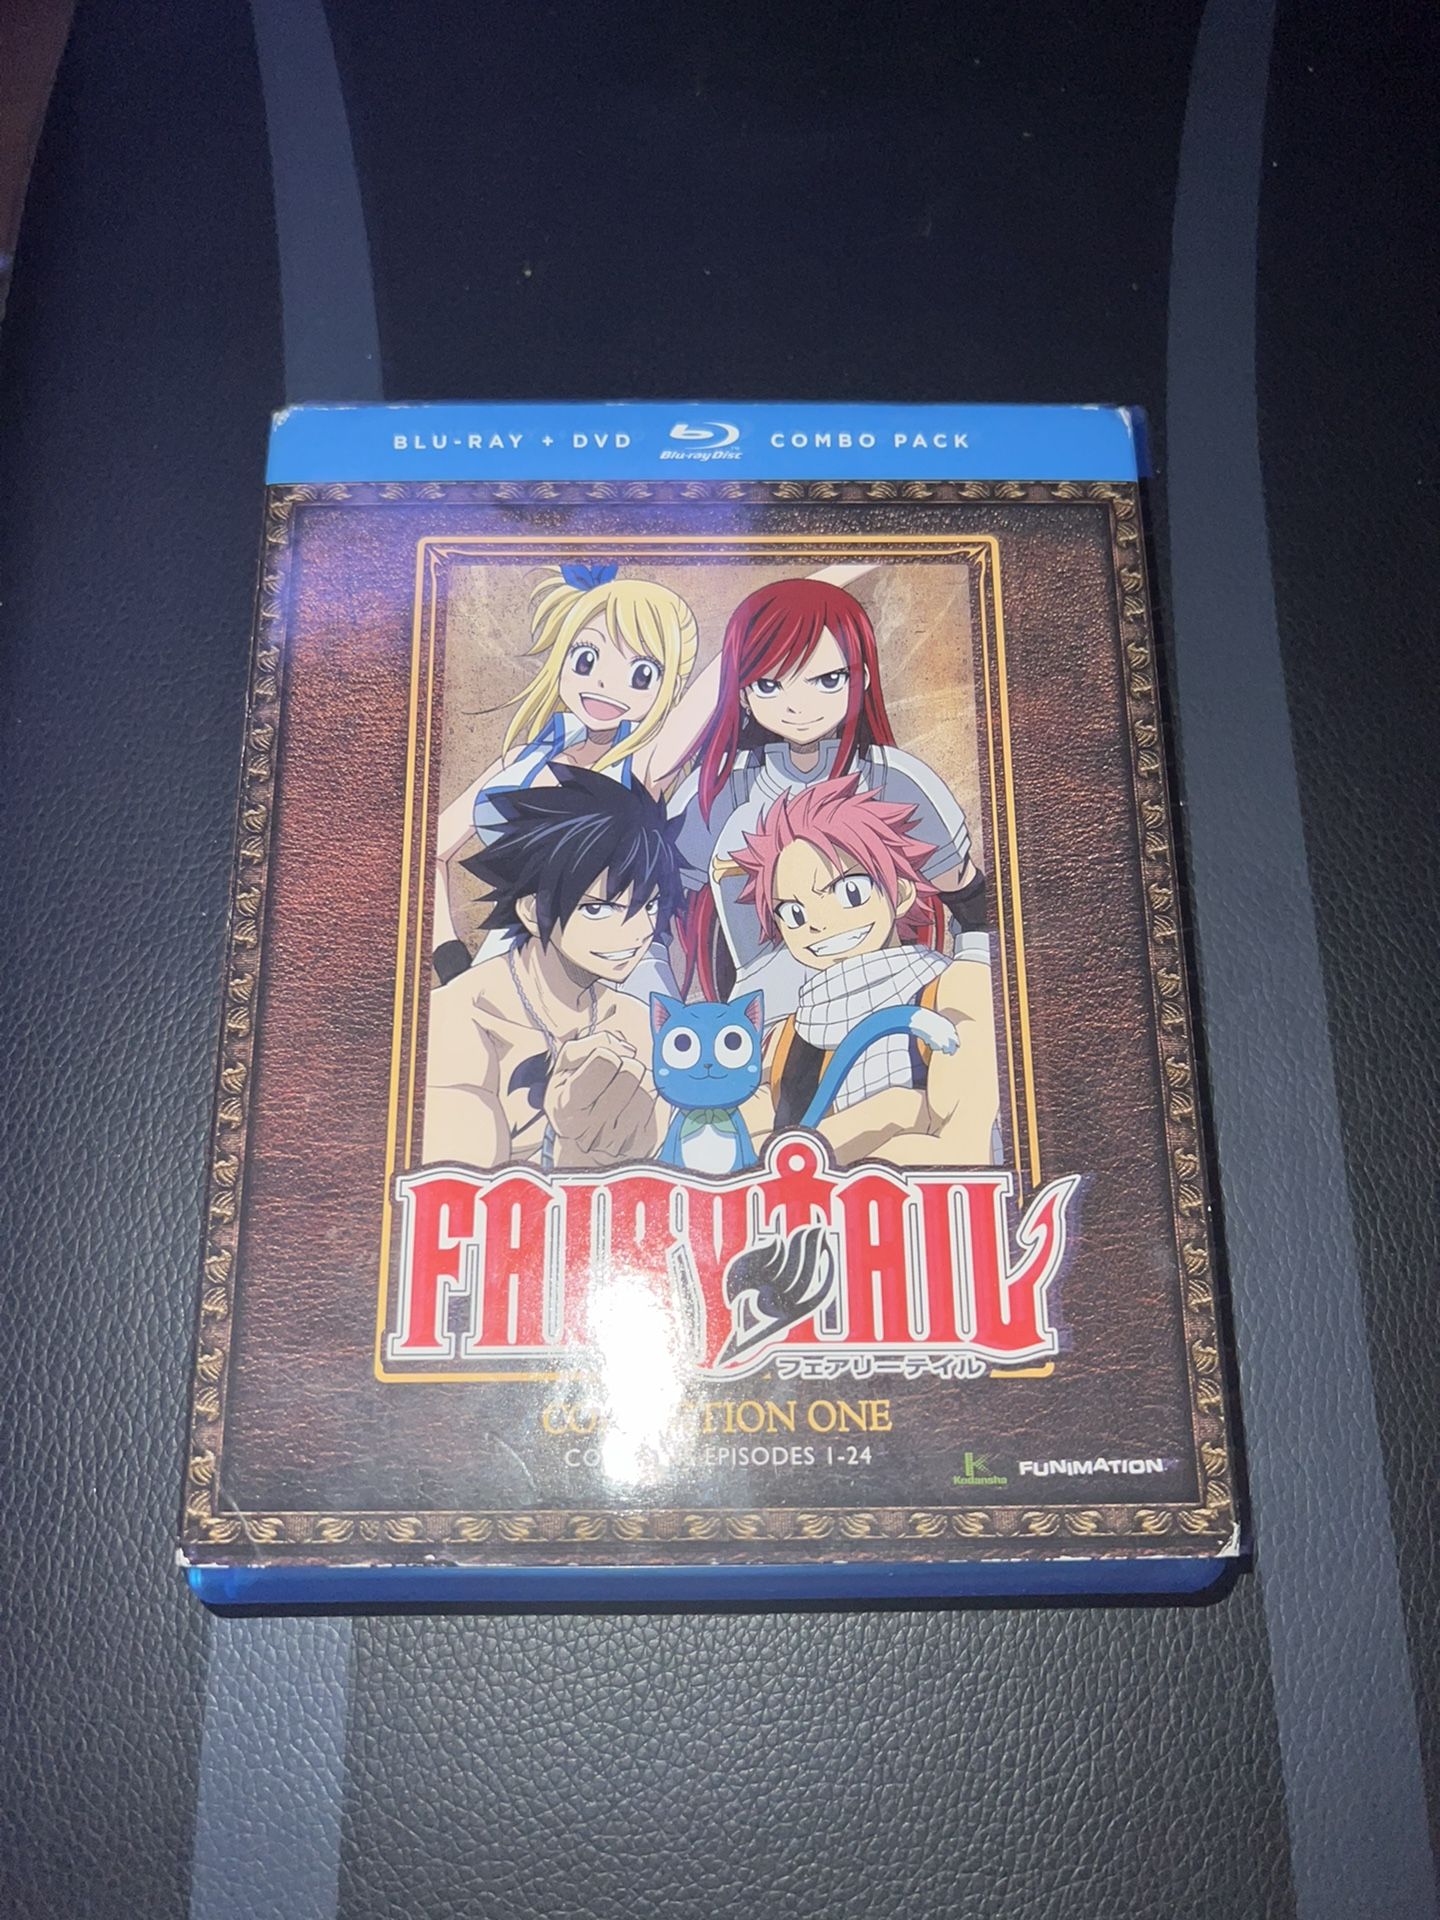 Fairy Tail Collection One Blu-ray+dvd Combo Pack 